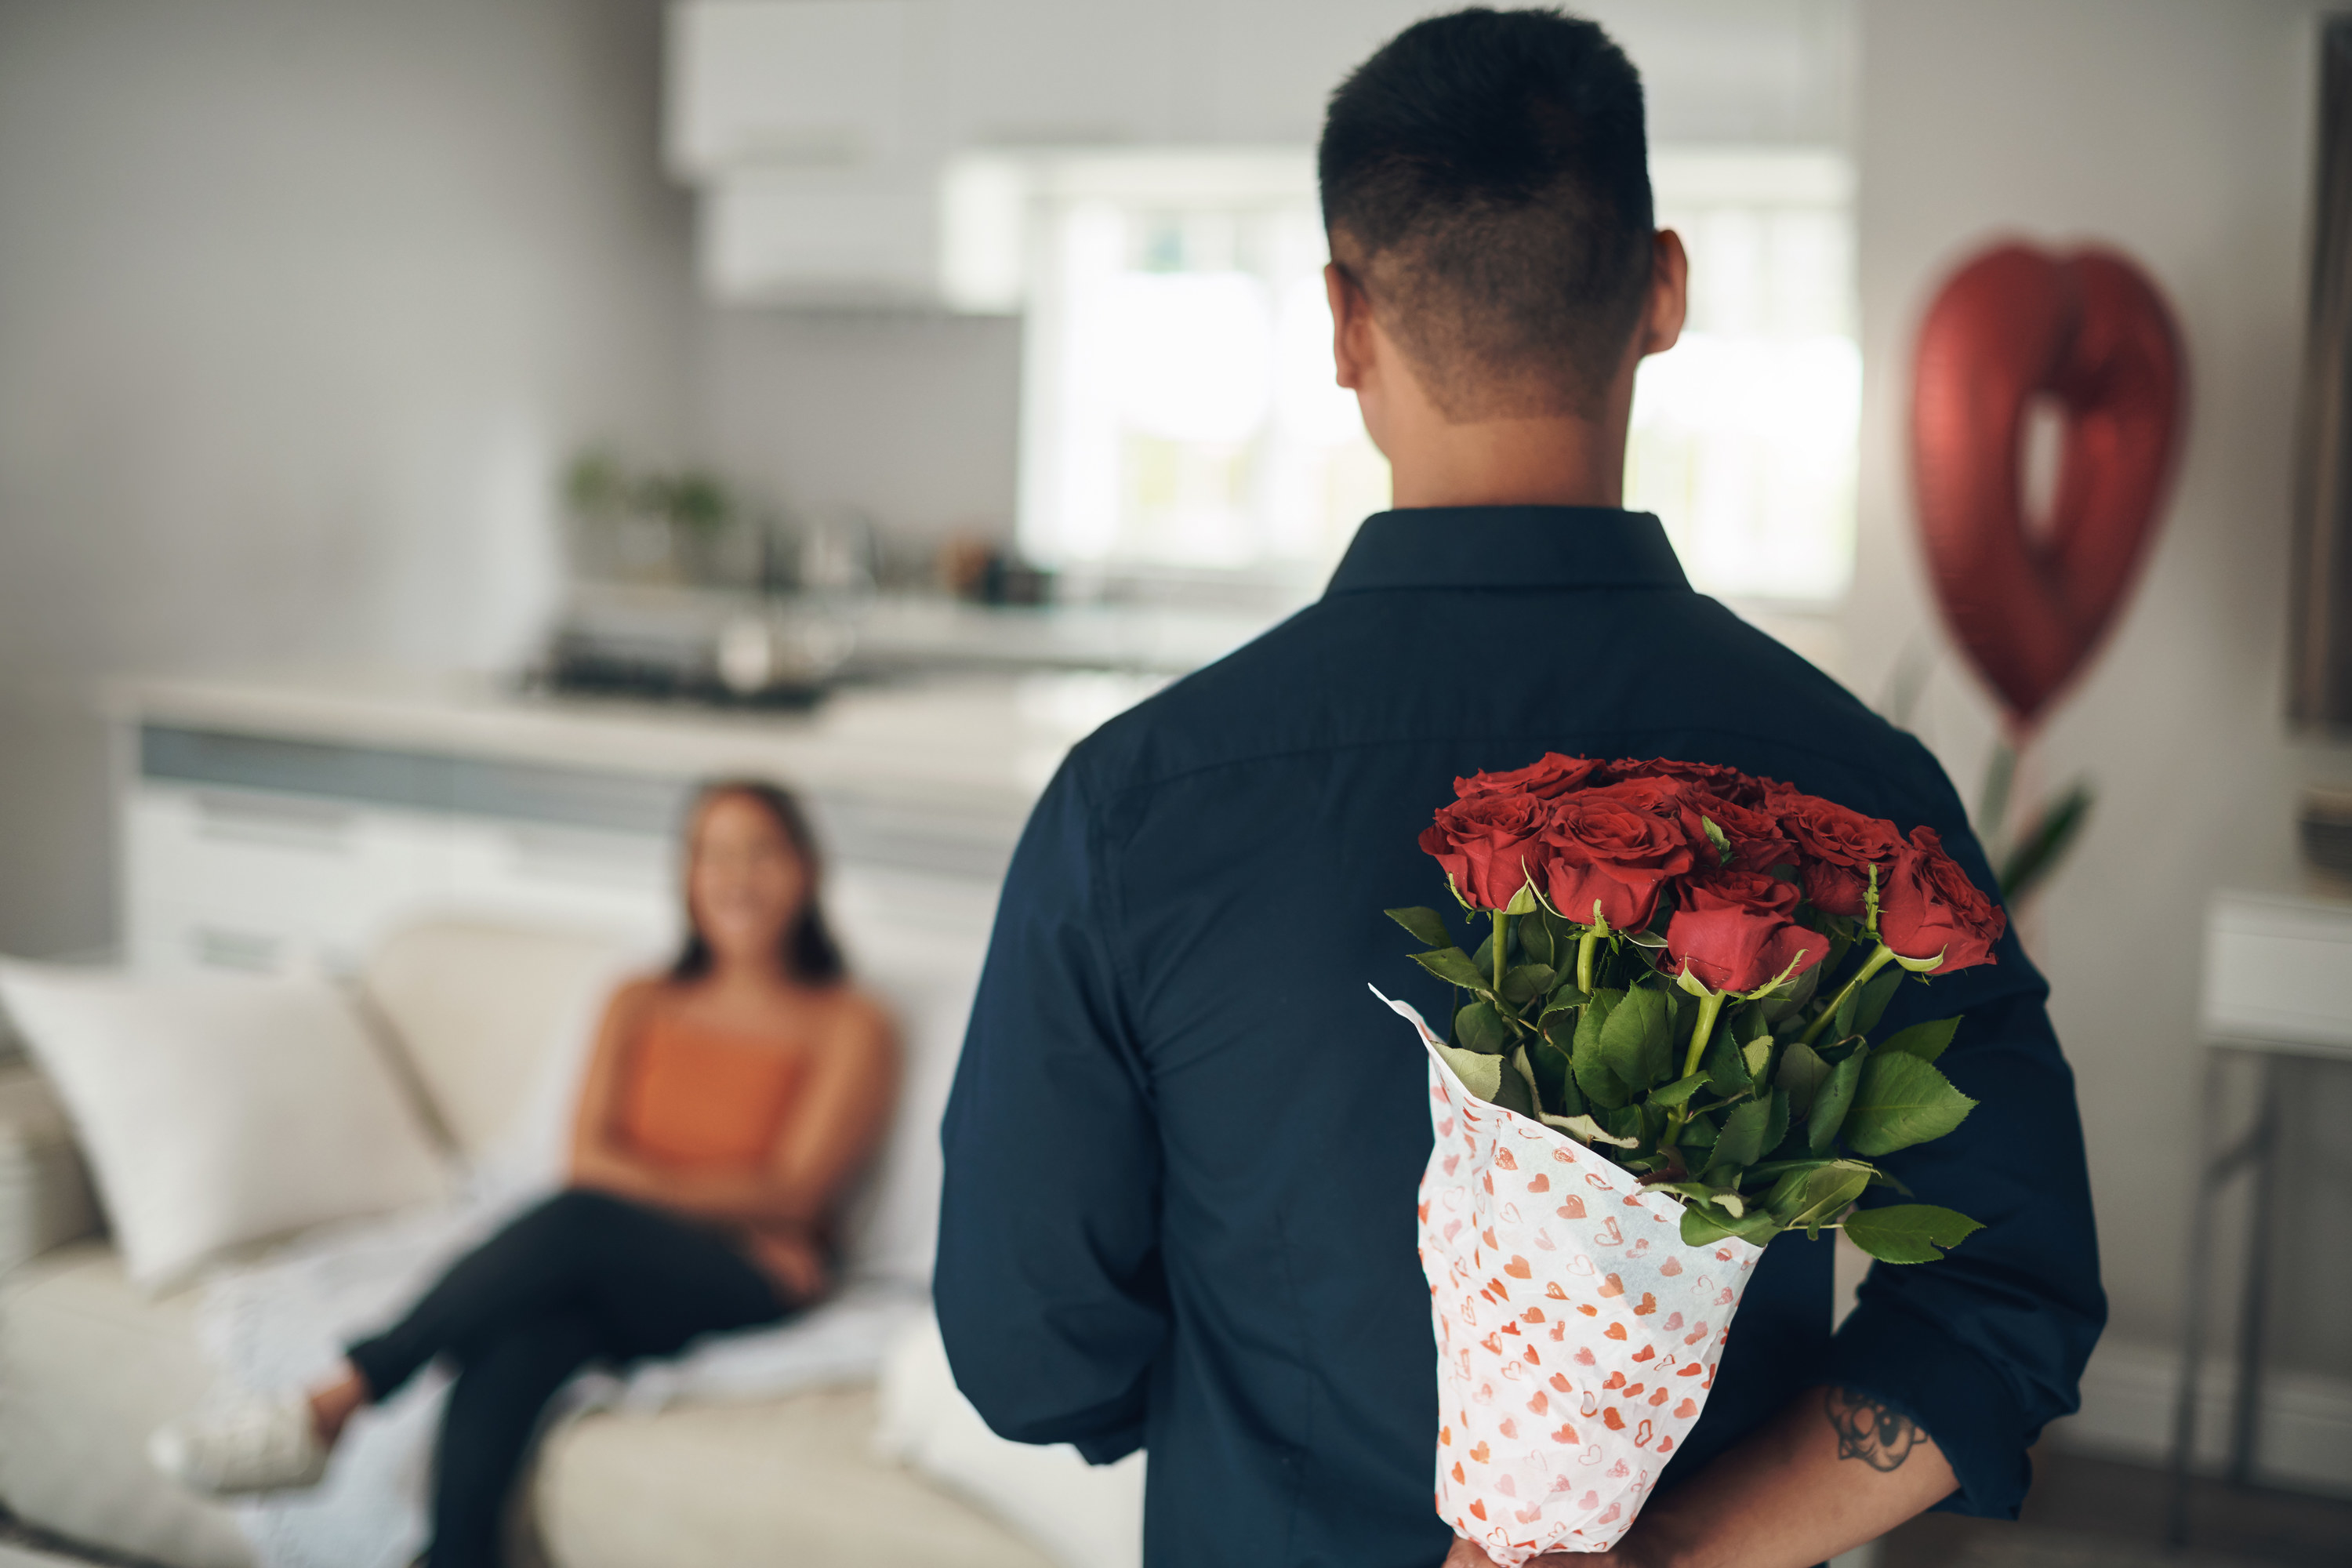 A man getting flowers for his gf